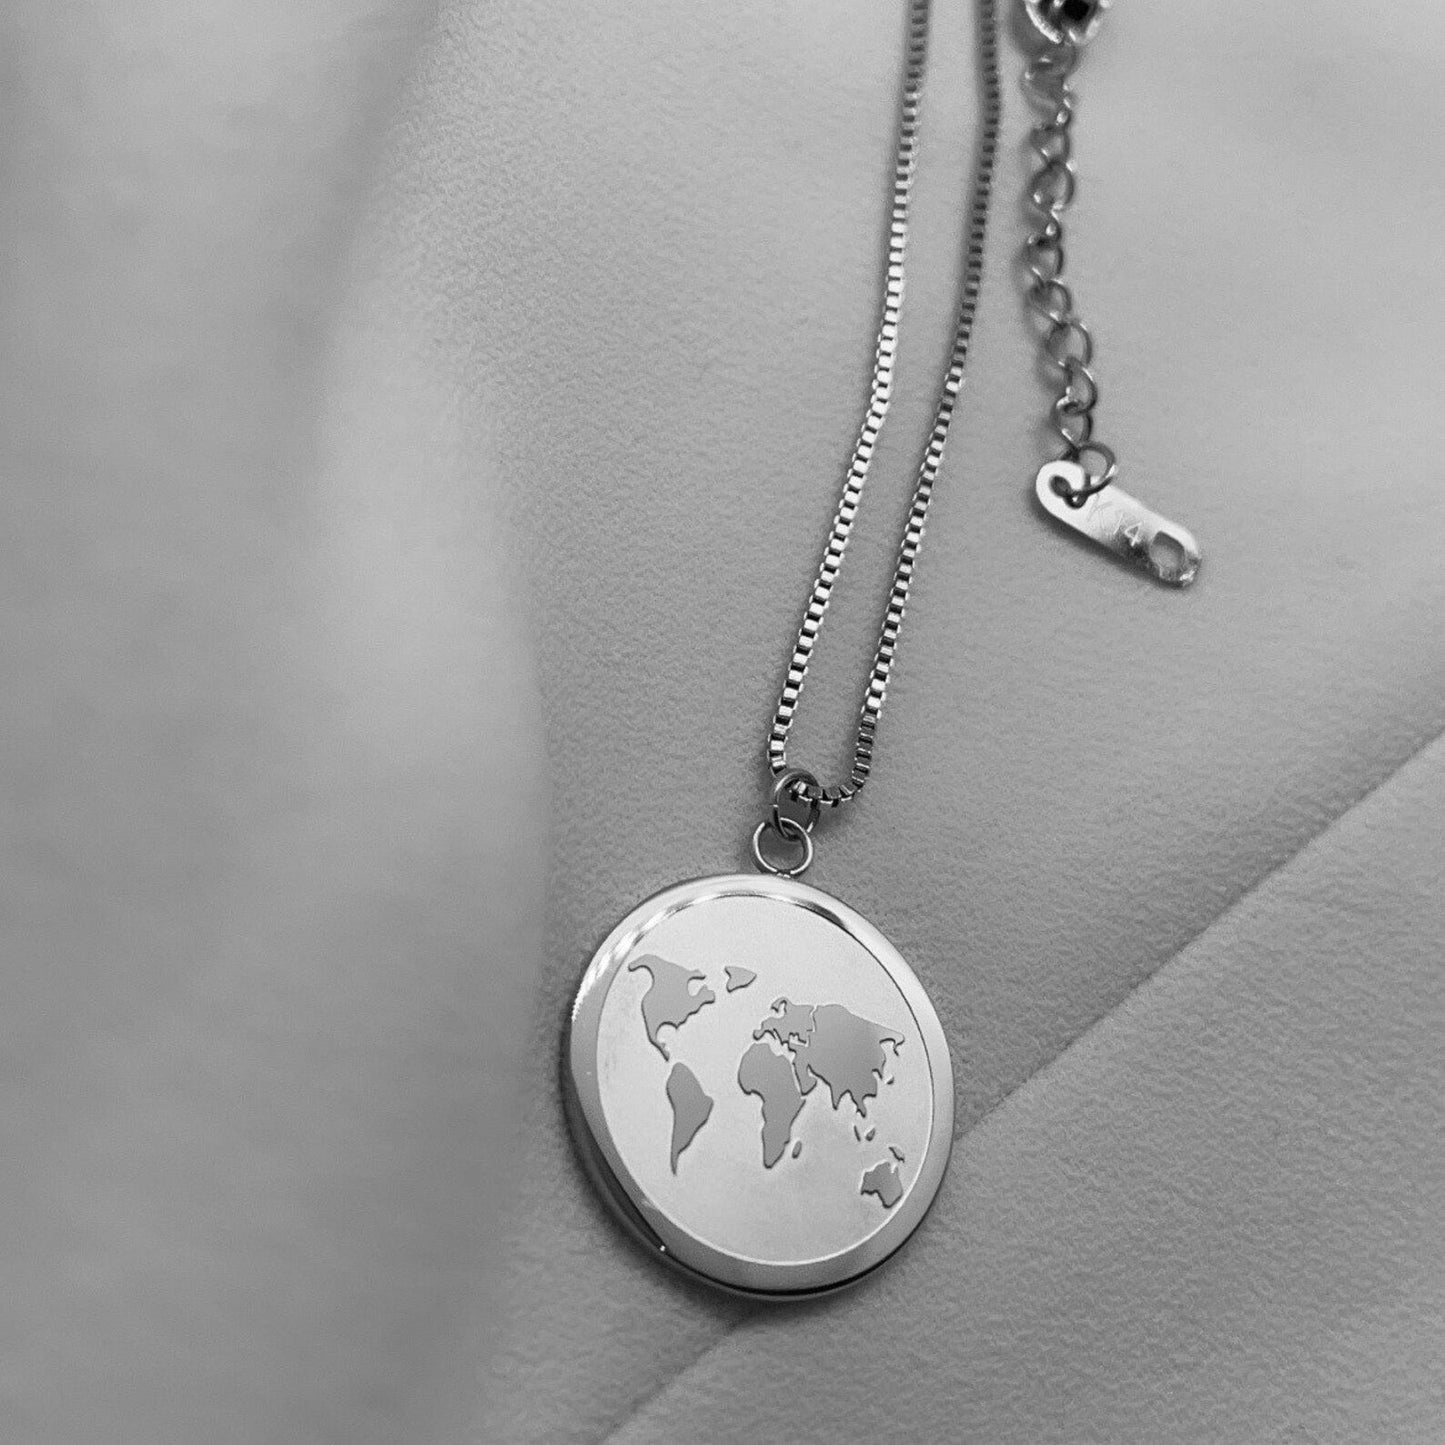 Global Citizen Necklace Wear The Peace Necklaces Silver